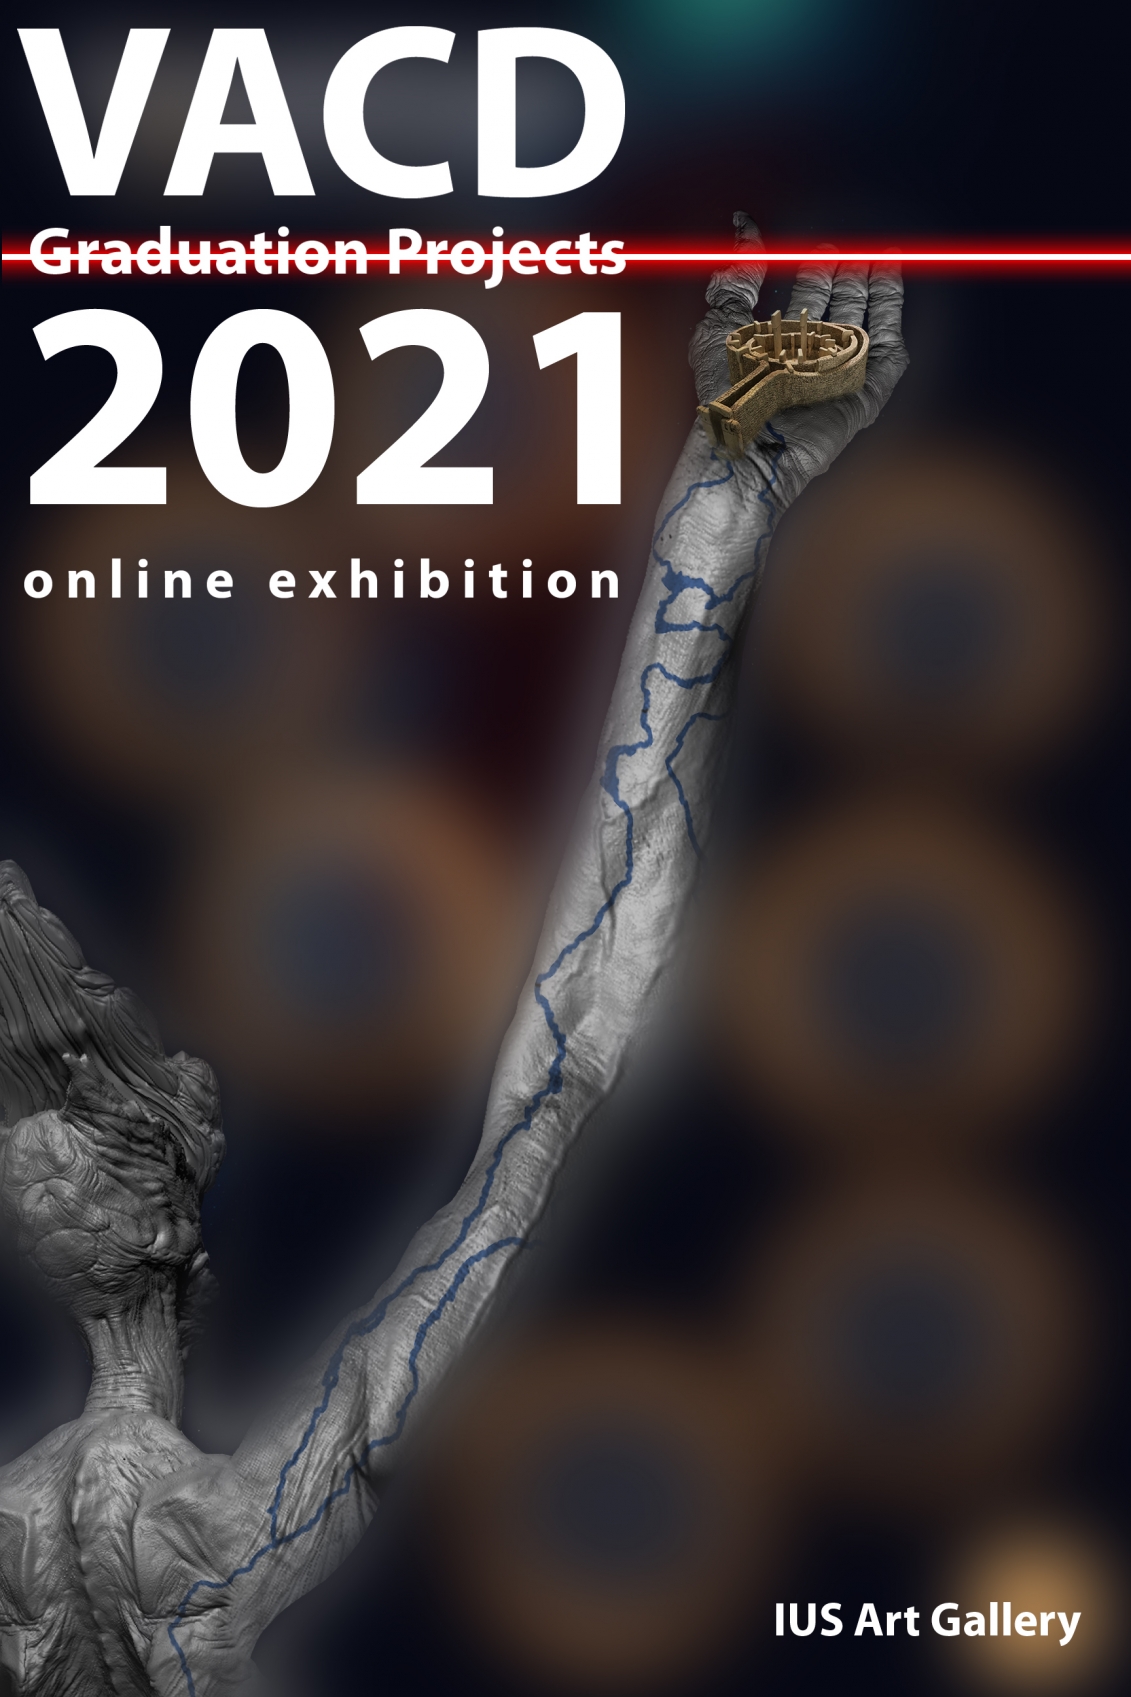 Exhibition of the VACD Graduation Projects 2021